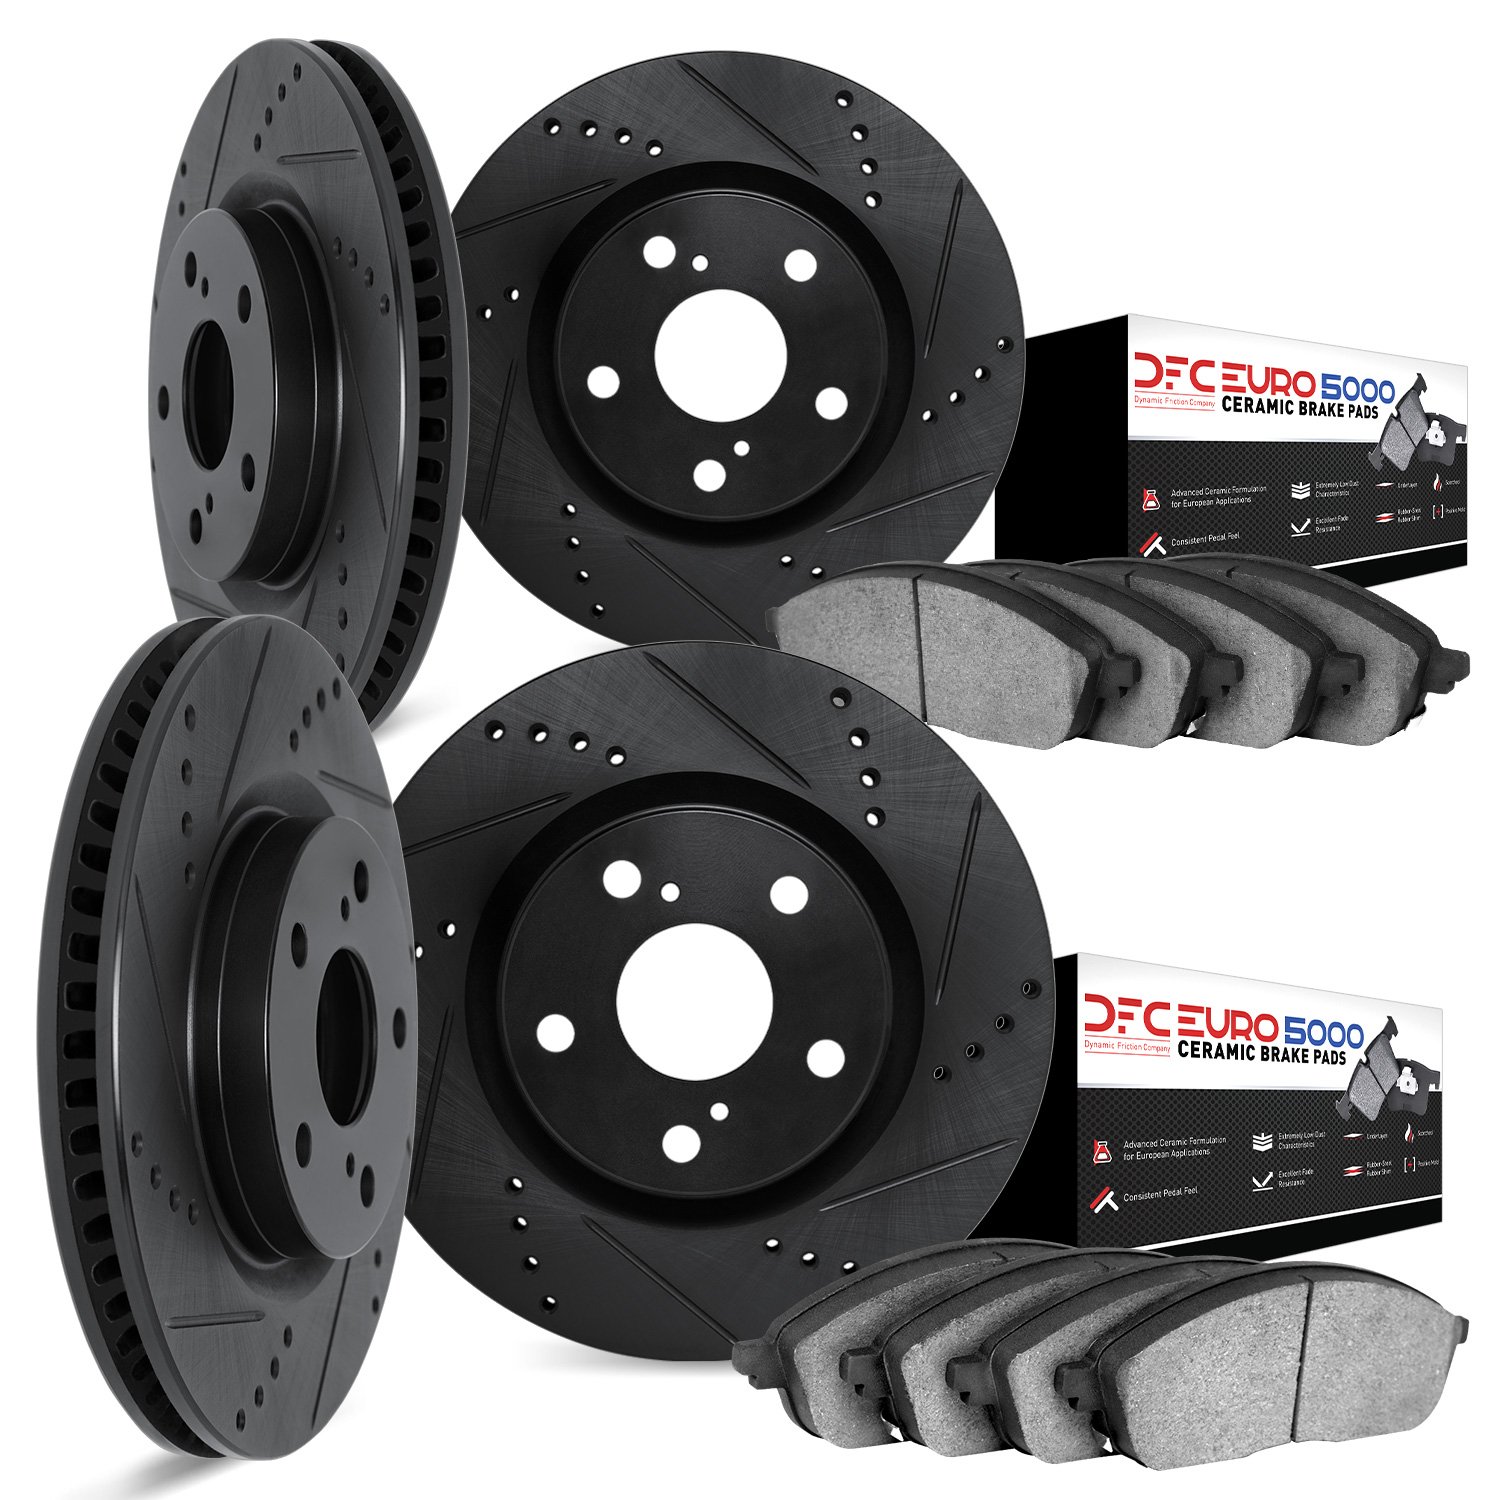 8604-31023 Drilled/Slotted Brake Rotors w/5000 Euro Ceramic Brake Pads Kit [Black], 2013-2013 BMW, Position: Front and Rear